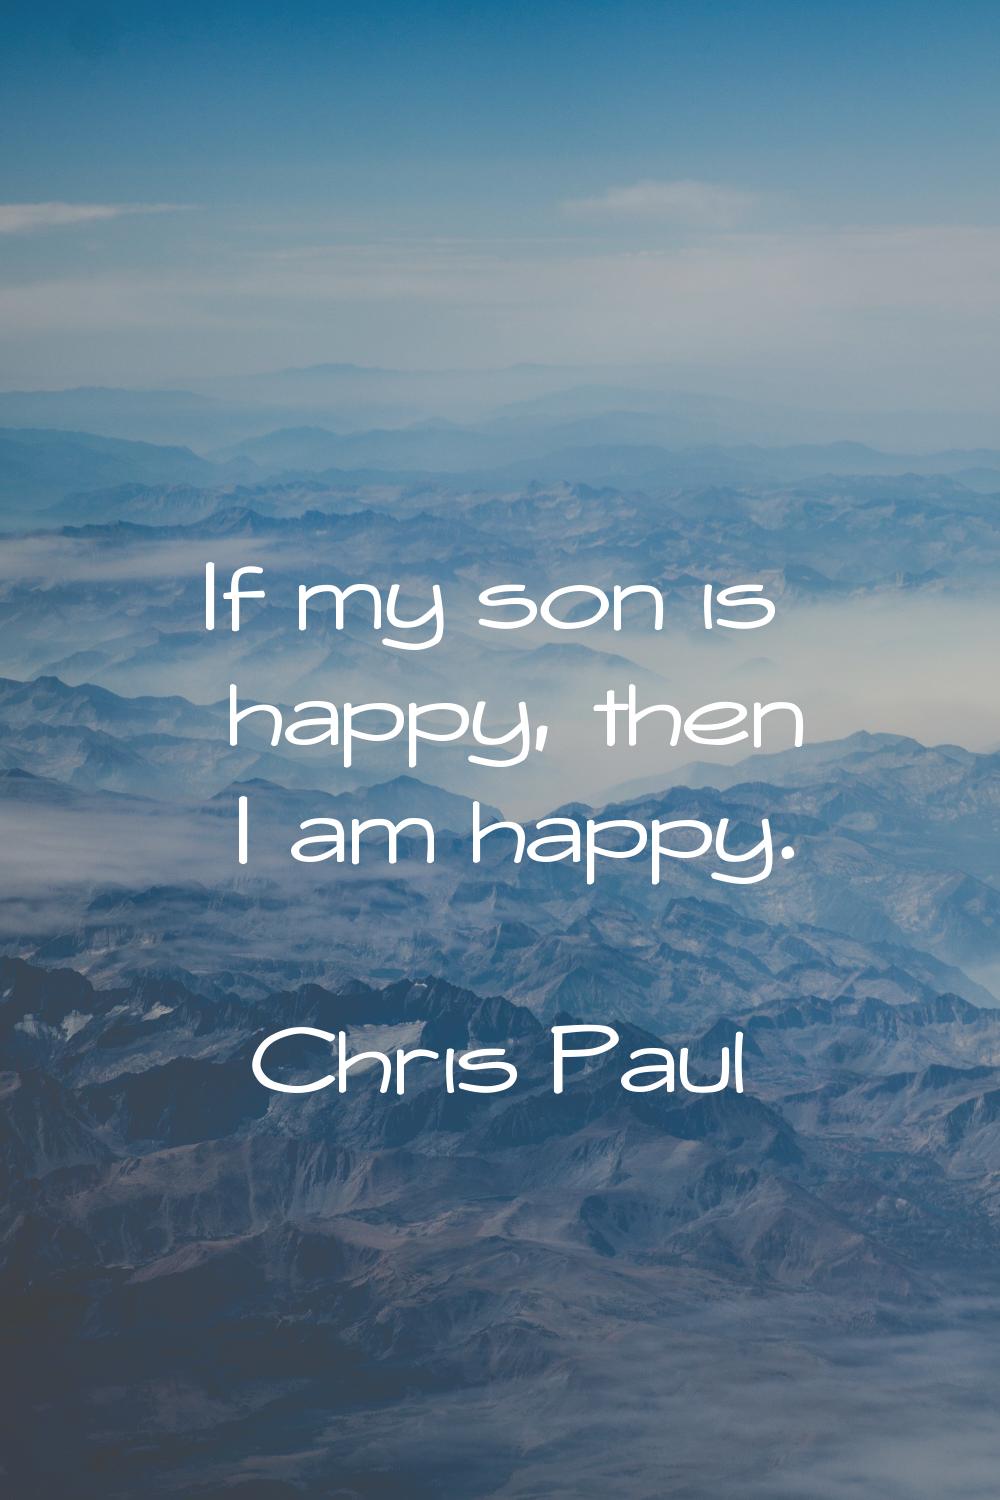 If my son is happy, then I am happy.